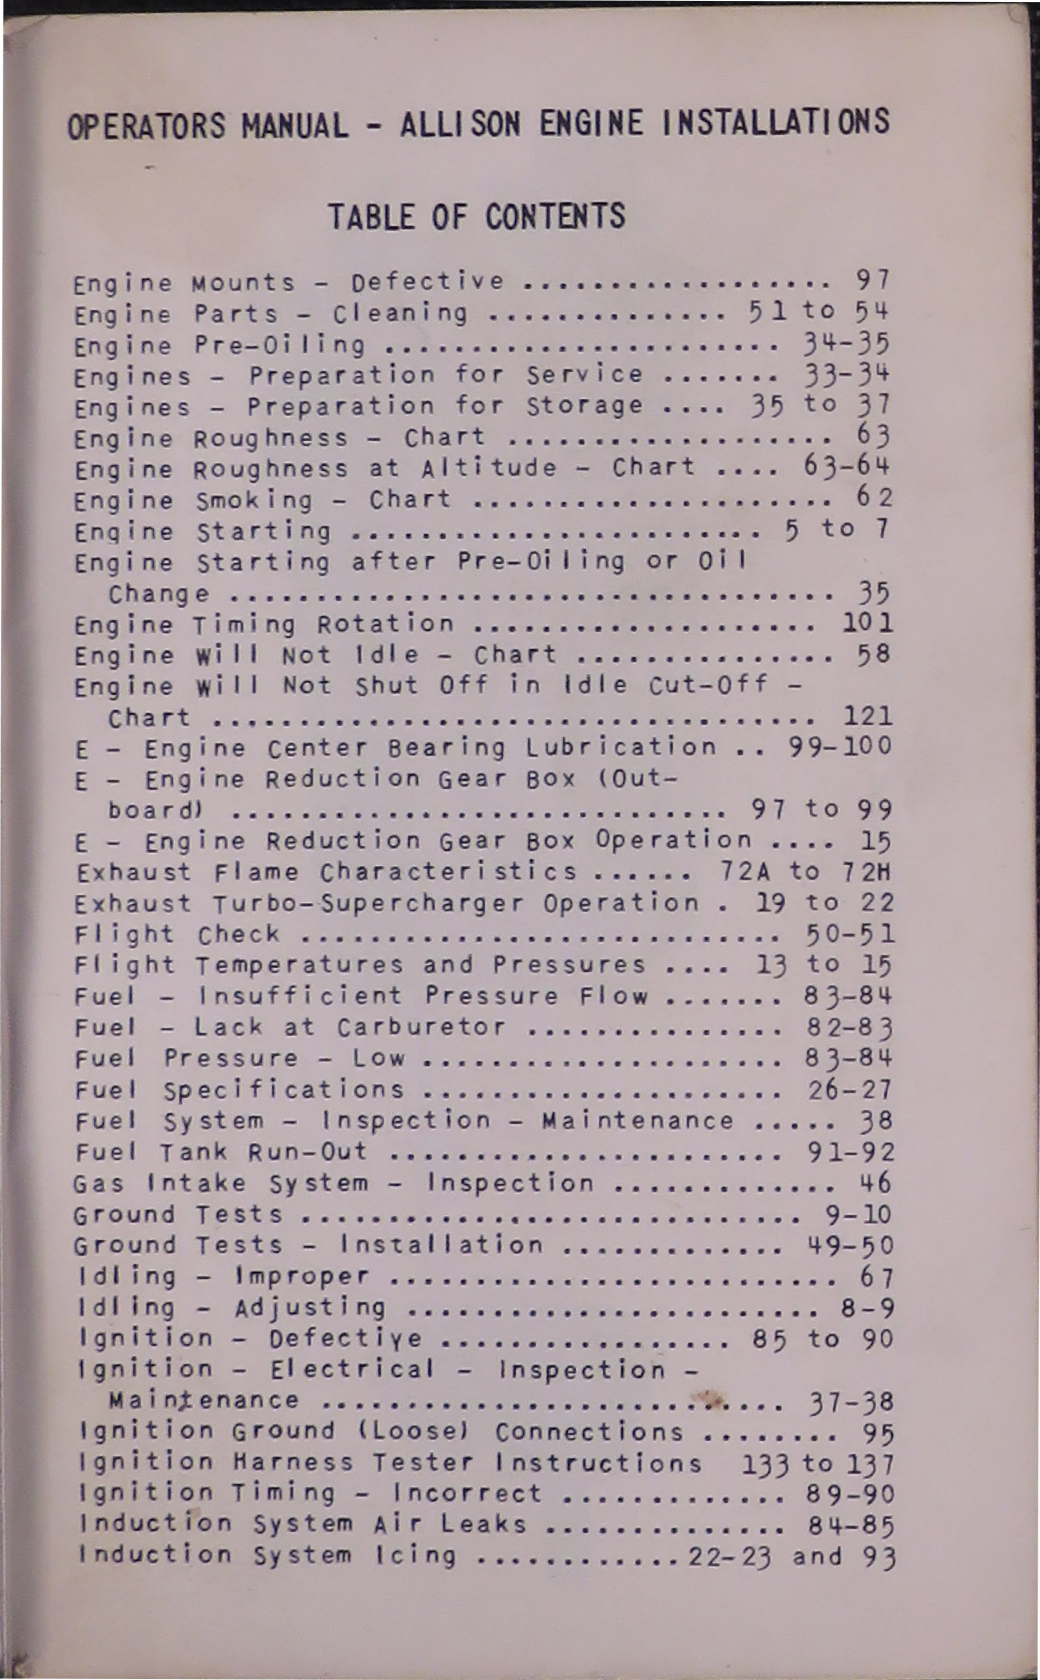 Sample page 7 from AirCorps Library document: Operators Manual for Allison Engine Installations